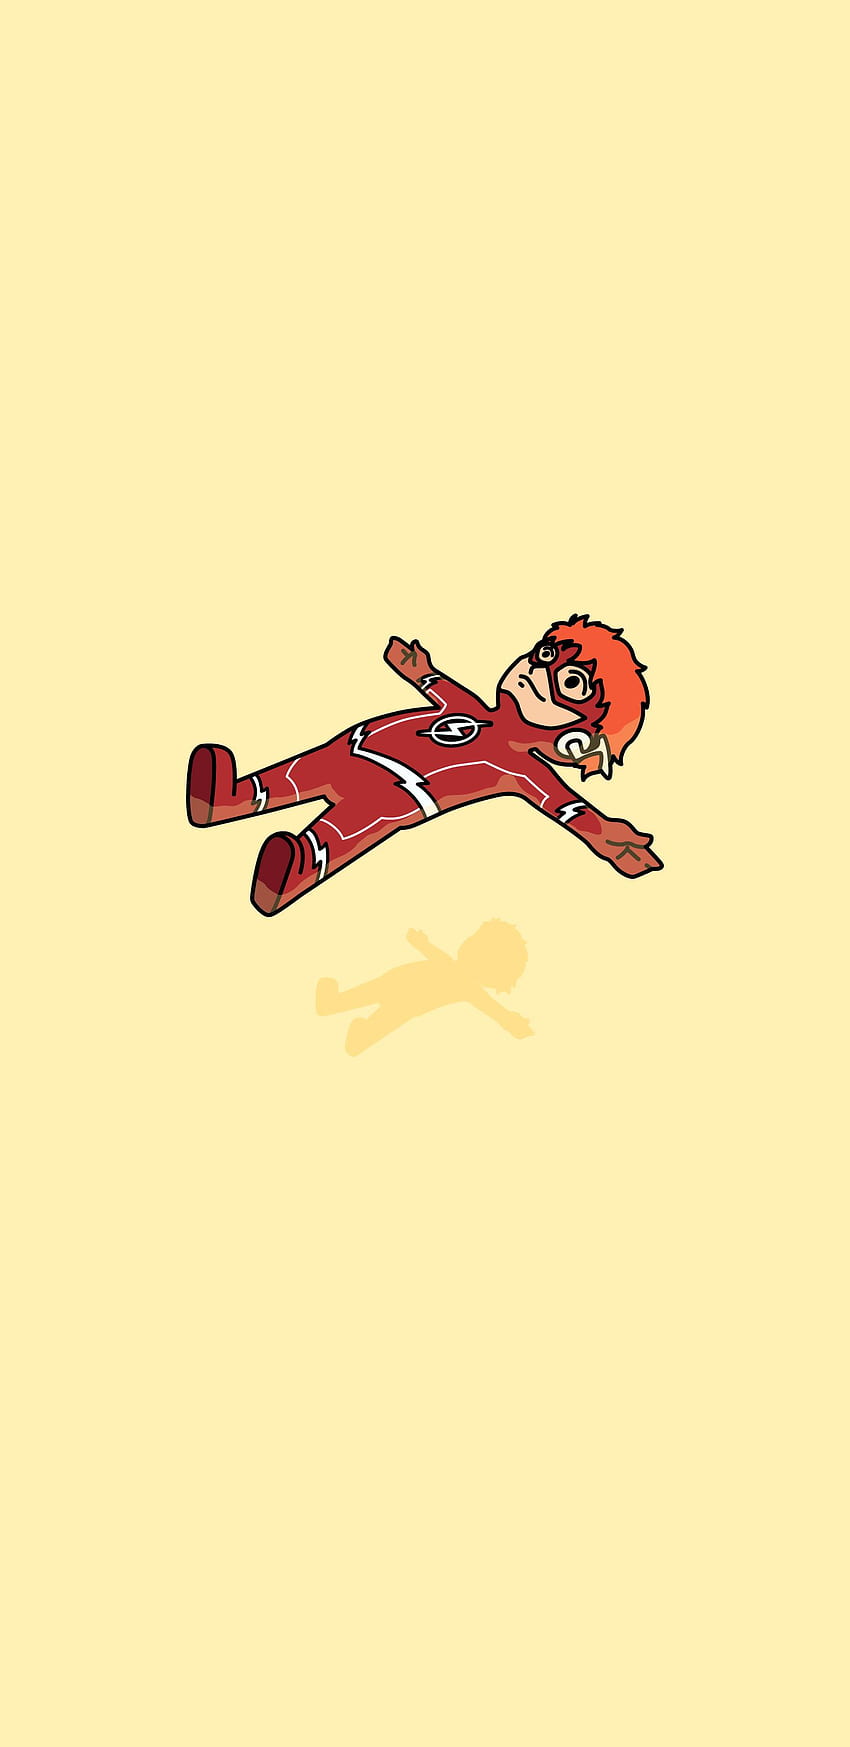 Fan Art A Phone Of Wally West Flash Just Chillin. (Made By My Ever So Talented Brother) : DCcomics, Wally West Rebirth HD phone wallpaper